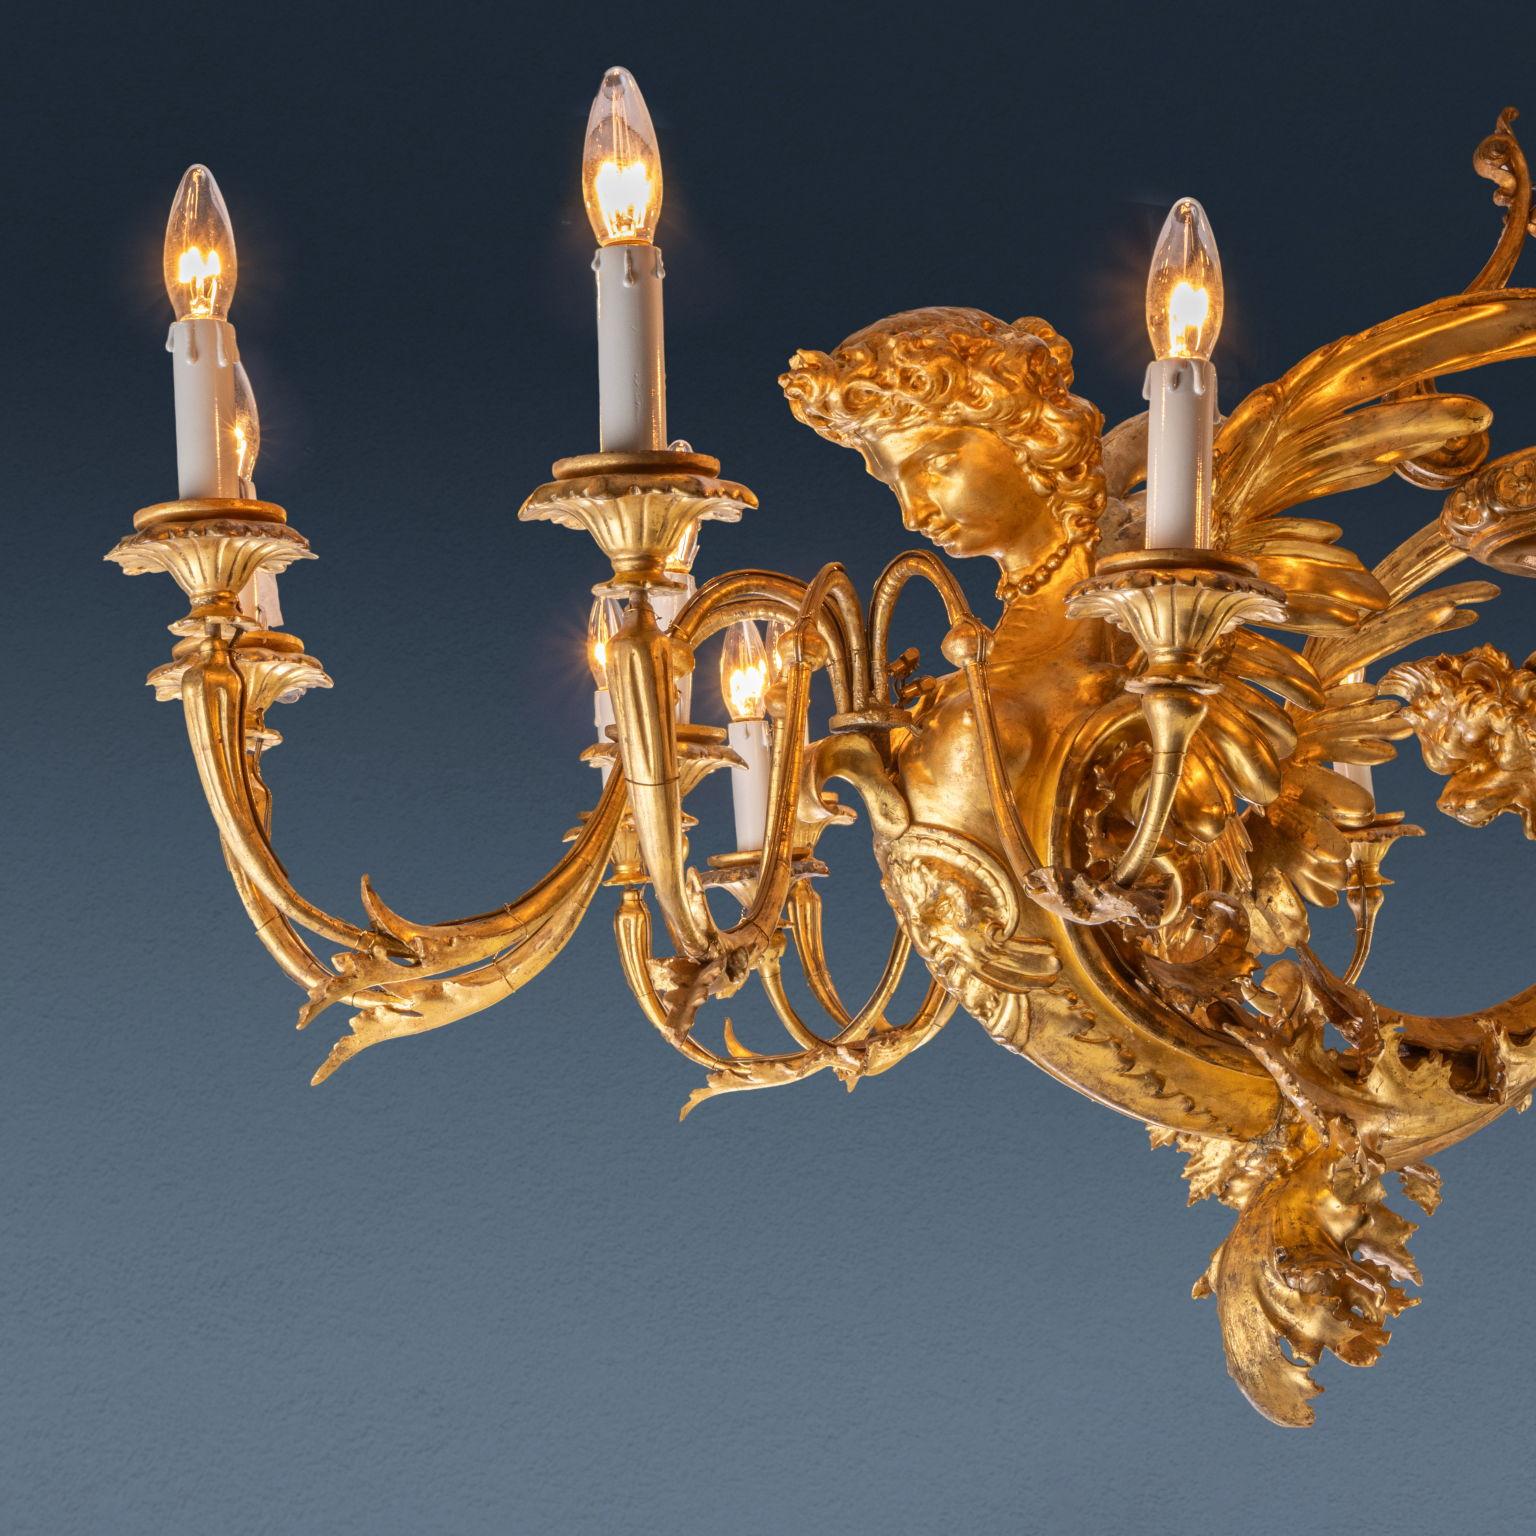 Mid-19th Century Chandelier, attributable to the workshop of Francesco Morini (1822-1899) For Sale